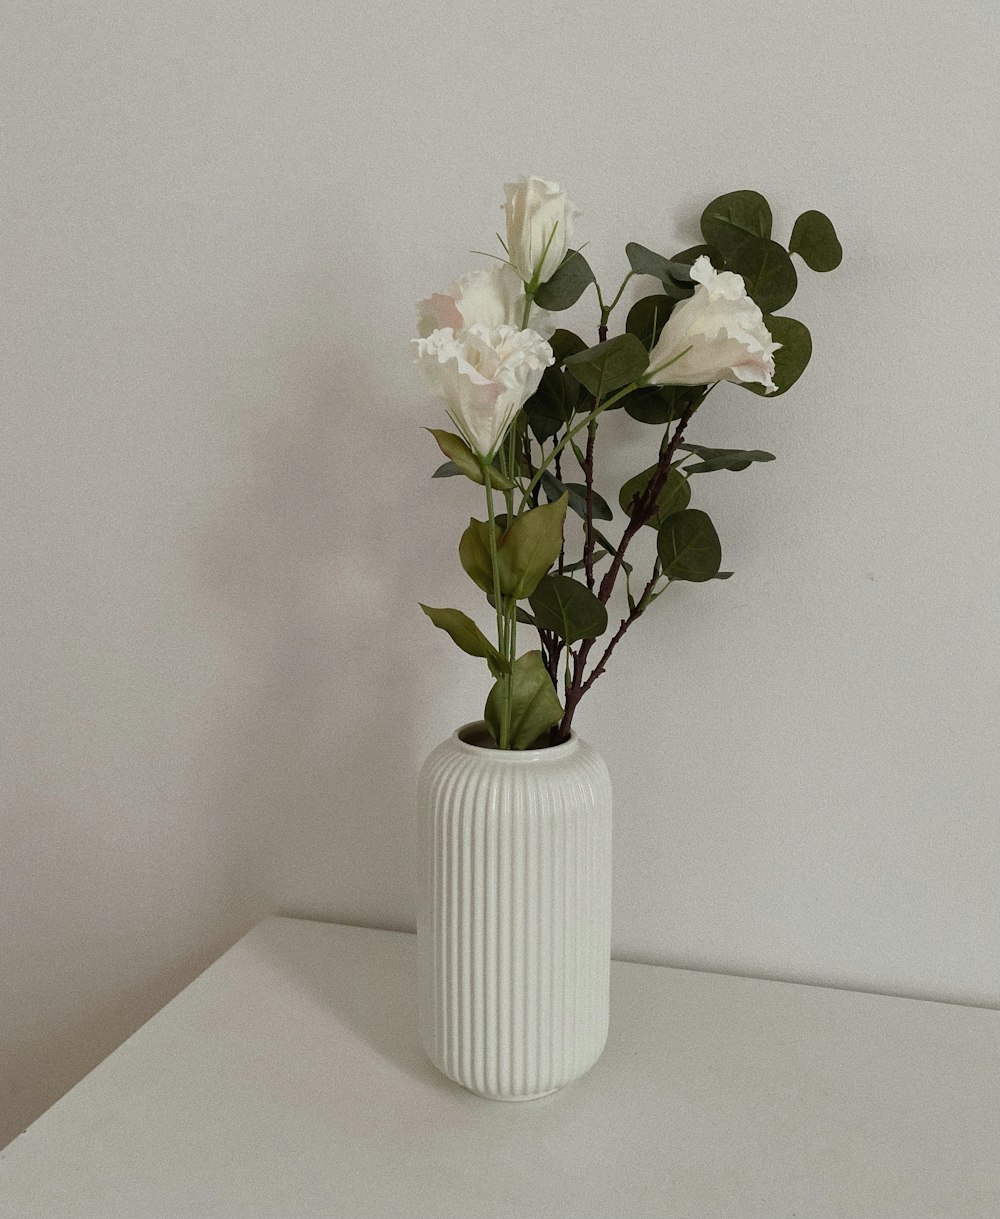 a vase with white flowers